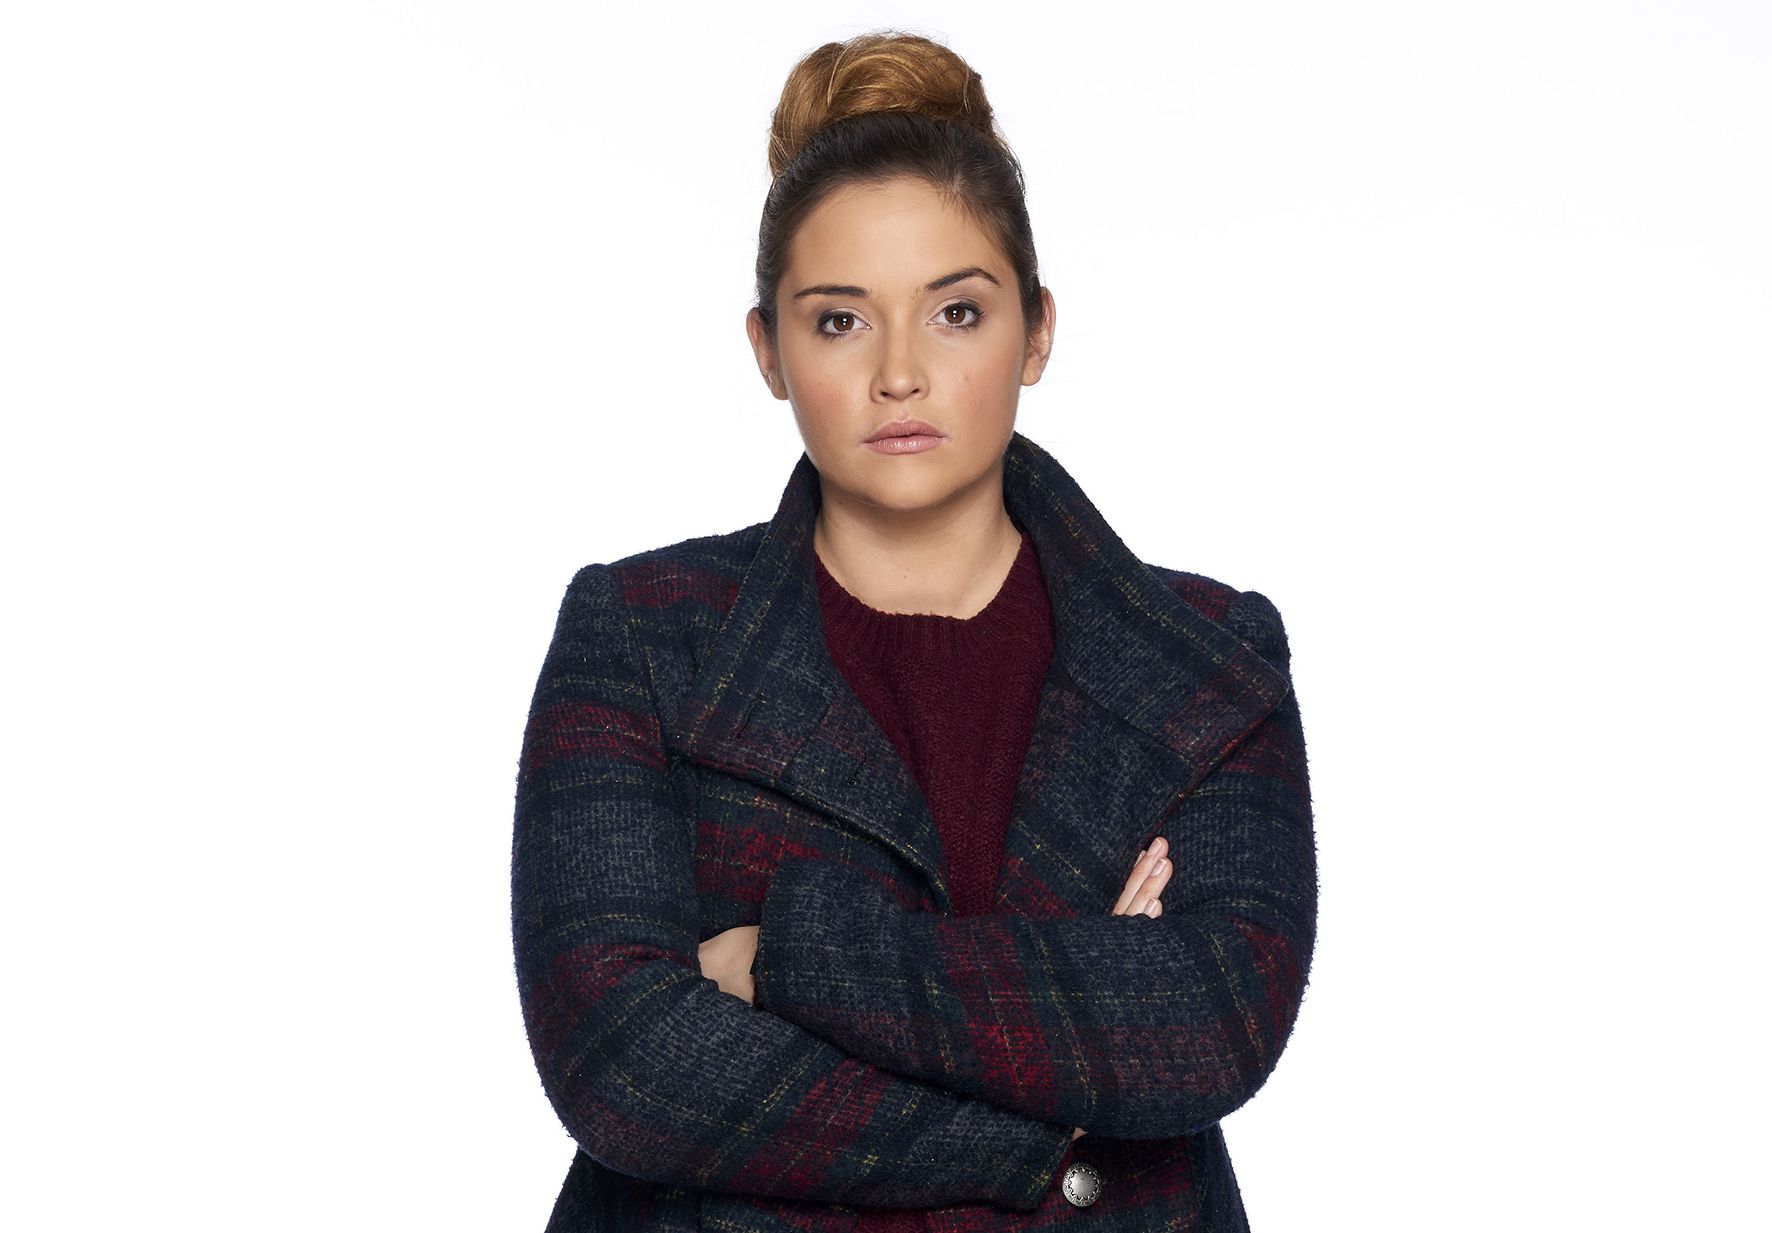 Eastenders Star Jacqueline Jossa To Make A Shock Comeback What To Watch